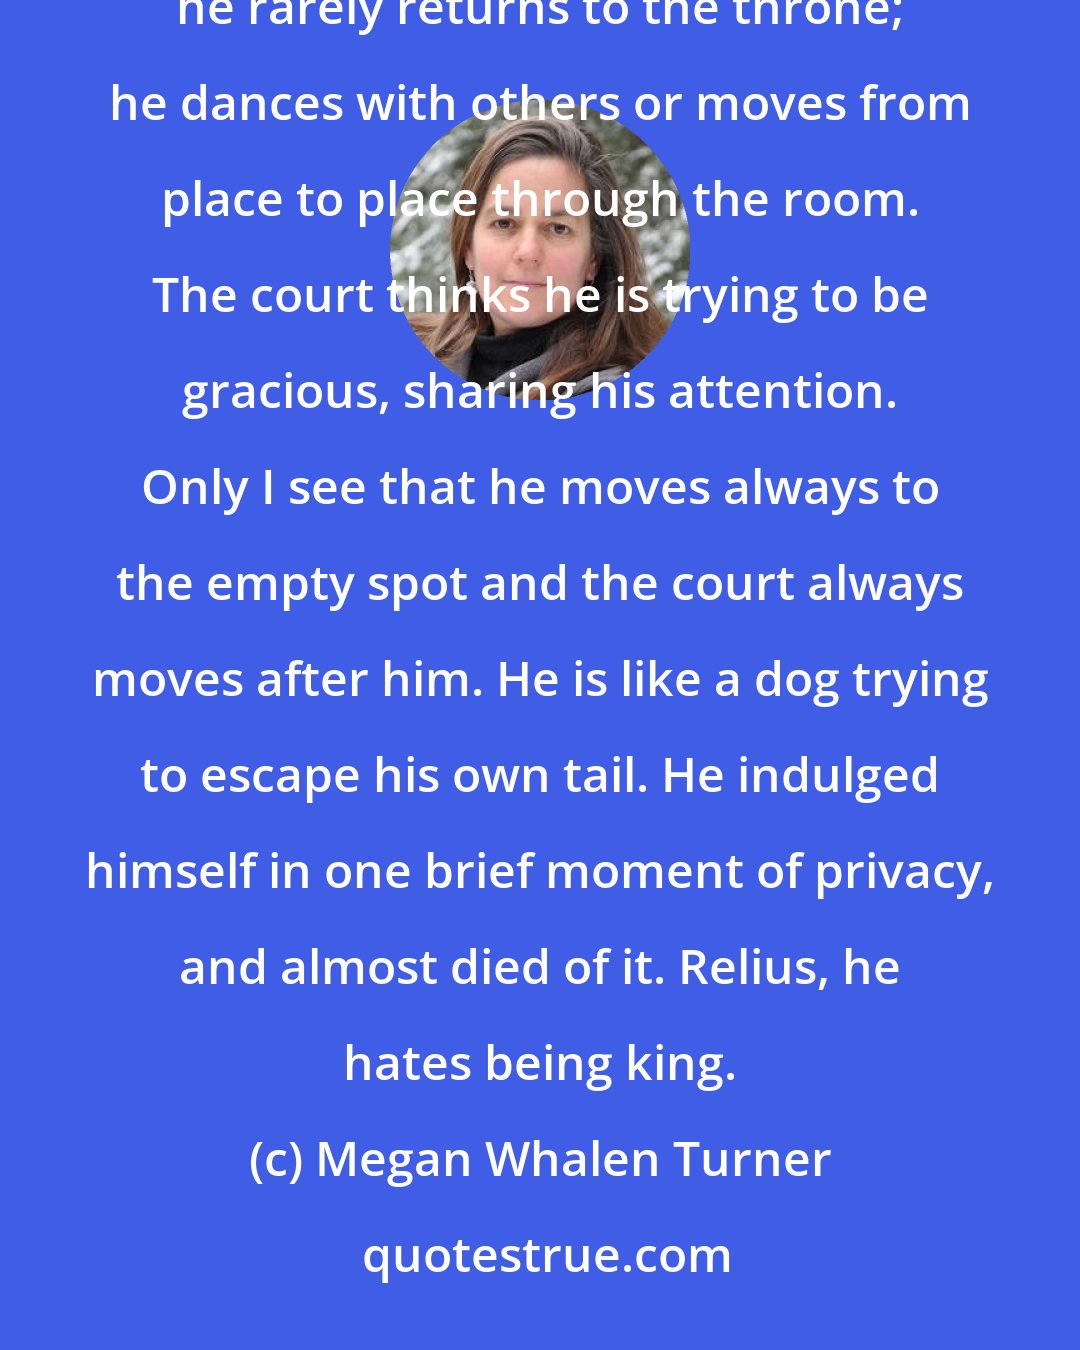 Megan Whalen Turner: He loves me, and I reward his love by forcing on him something he hates. In the evening, after we dance, he rarely returns to the throne; he dances with others or moves from place to place through the room. The court thinks he is trying to be gracious, sharing his attention. Only I see that he moves always to the empty spot and the court always moves after him. He is like a dog trying to escape his own tail. He indulged himself in one brief moment of privacy, and almost died of it. Relius, he hates being king.